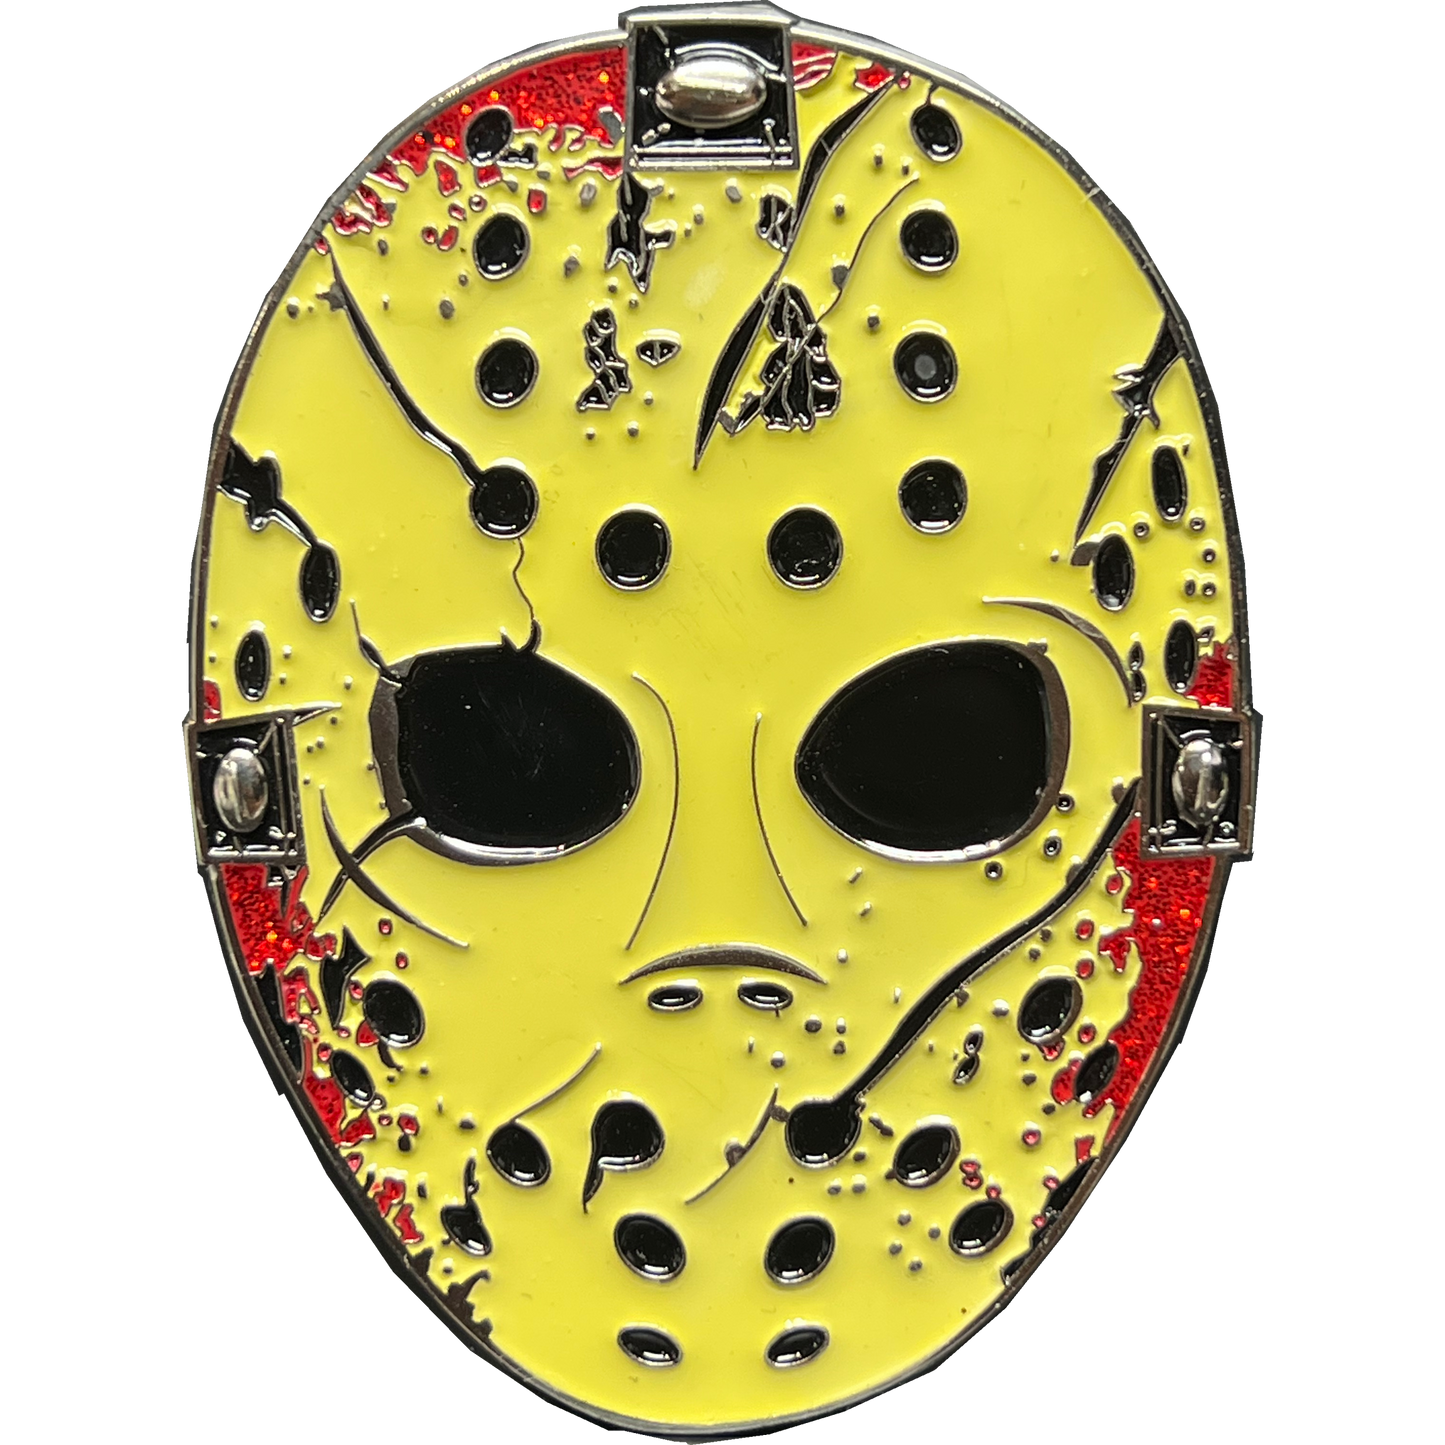 EL11-006 New York City Police Officer Jason Voorhees Challenge Coin Friday the 13th Movie Poster NYPD